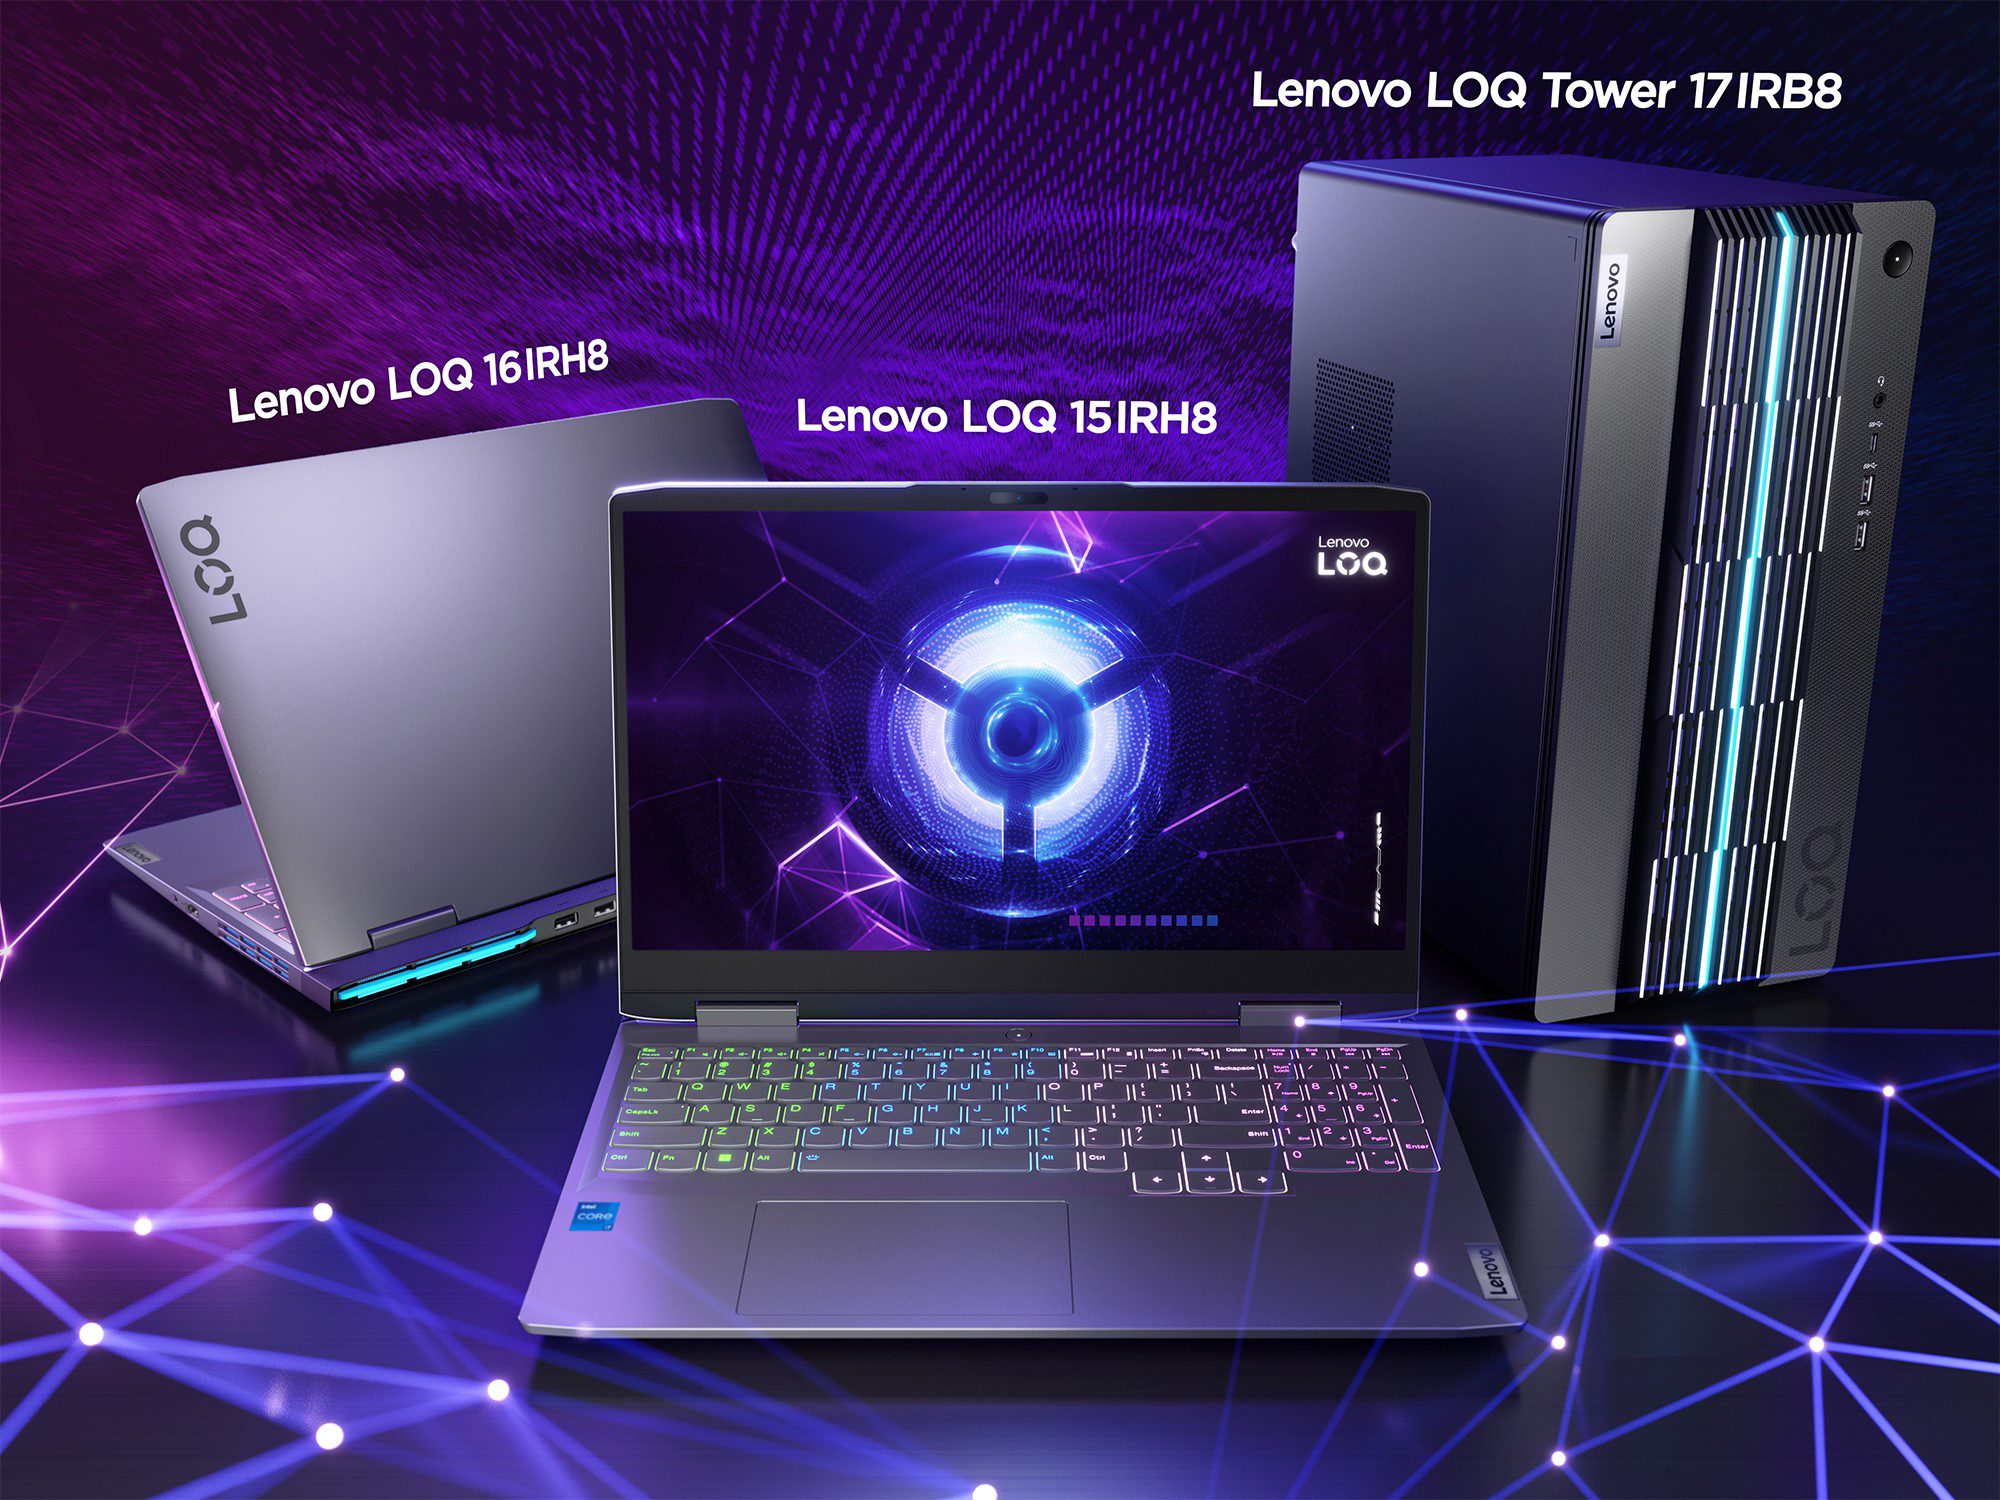 Introducing Brand New Lenovo LOQ Gaming Laptops and Tower PC for New Gamers  - Lenovo StoryHub